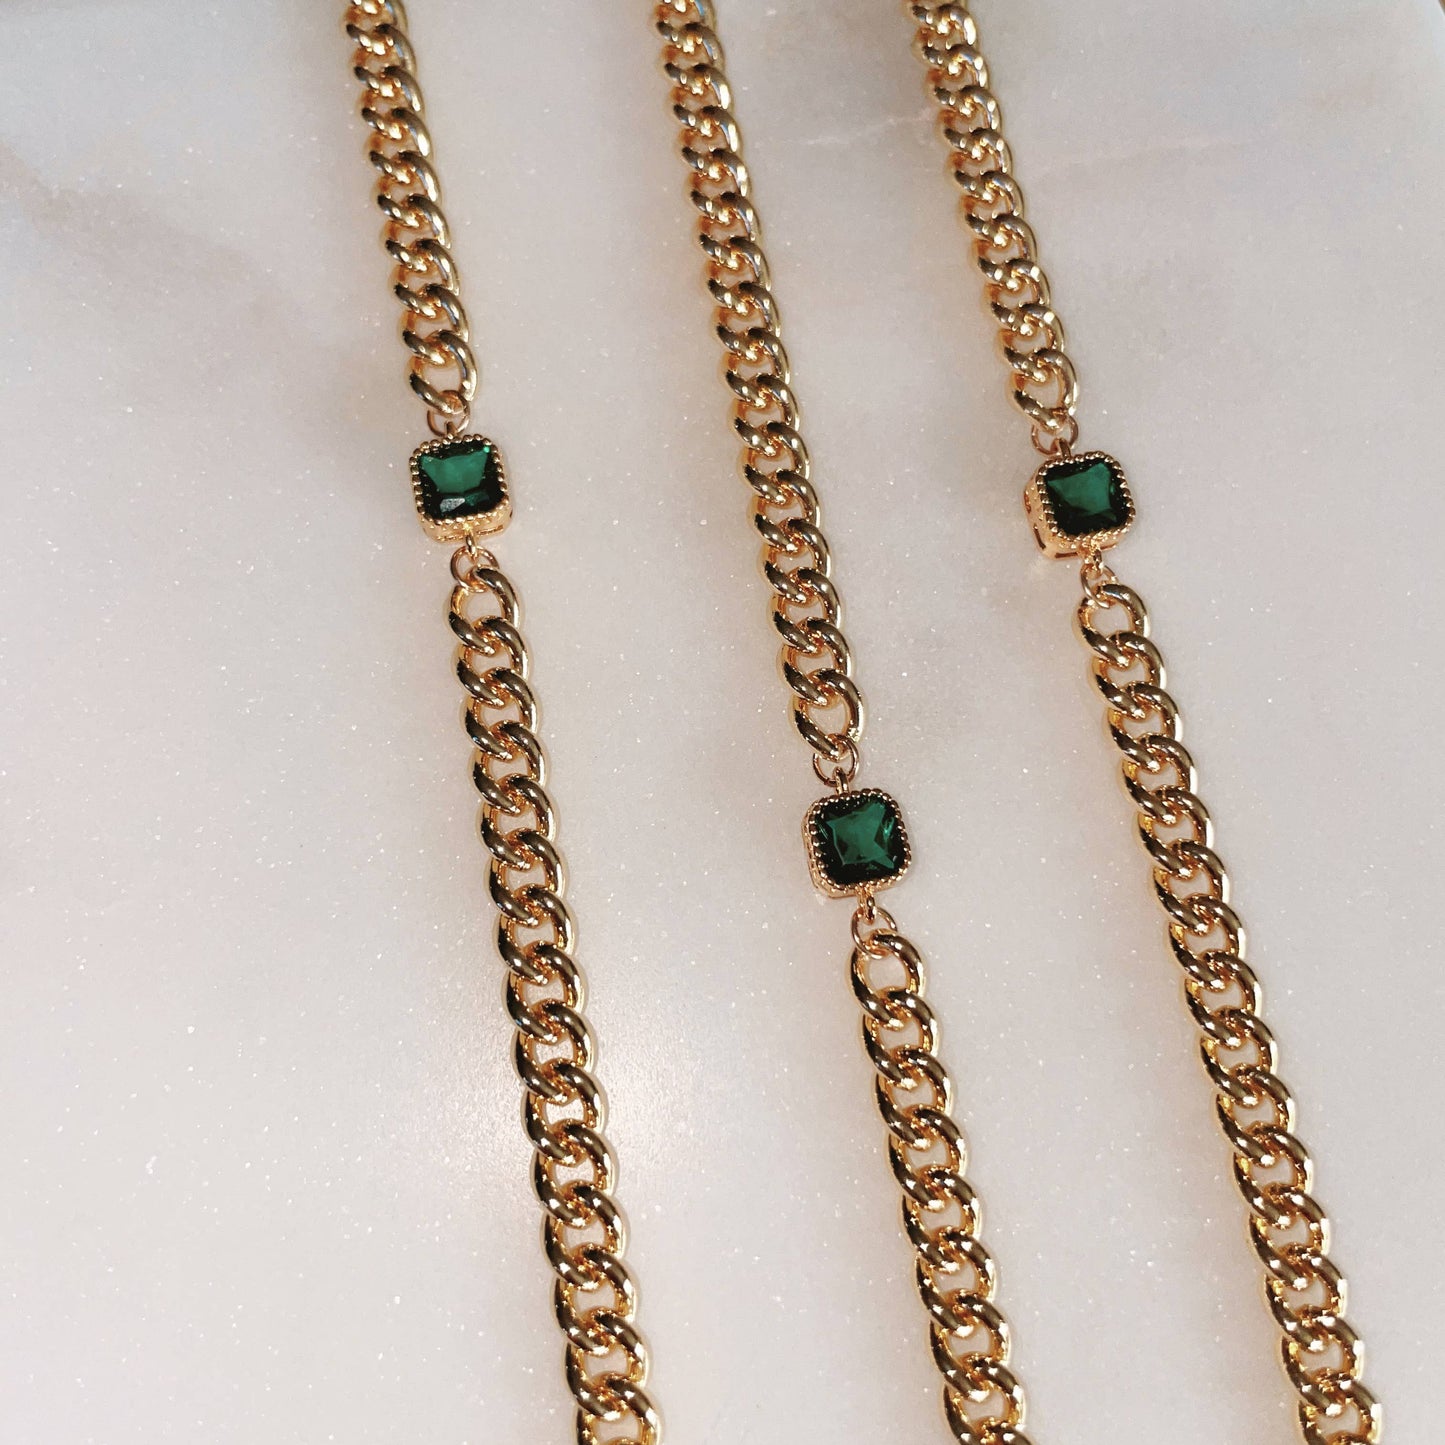 Night Bird Necklace Emerald Stone Gold Filled Chain Necklace: 16”